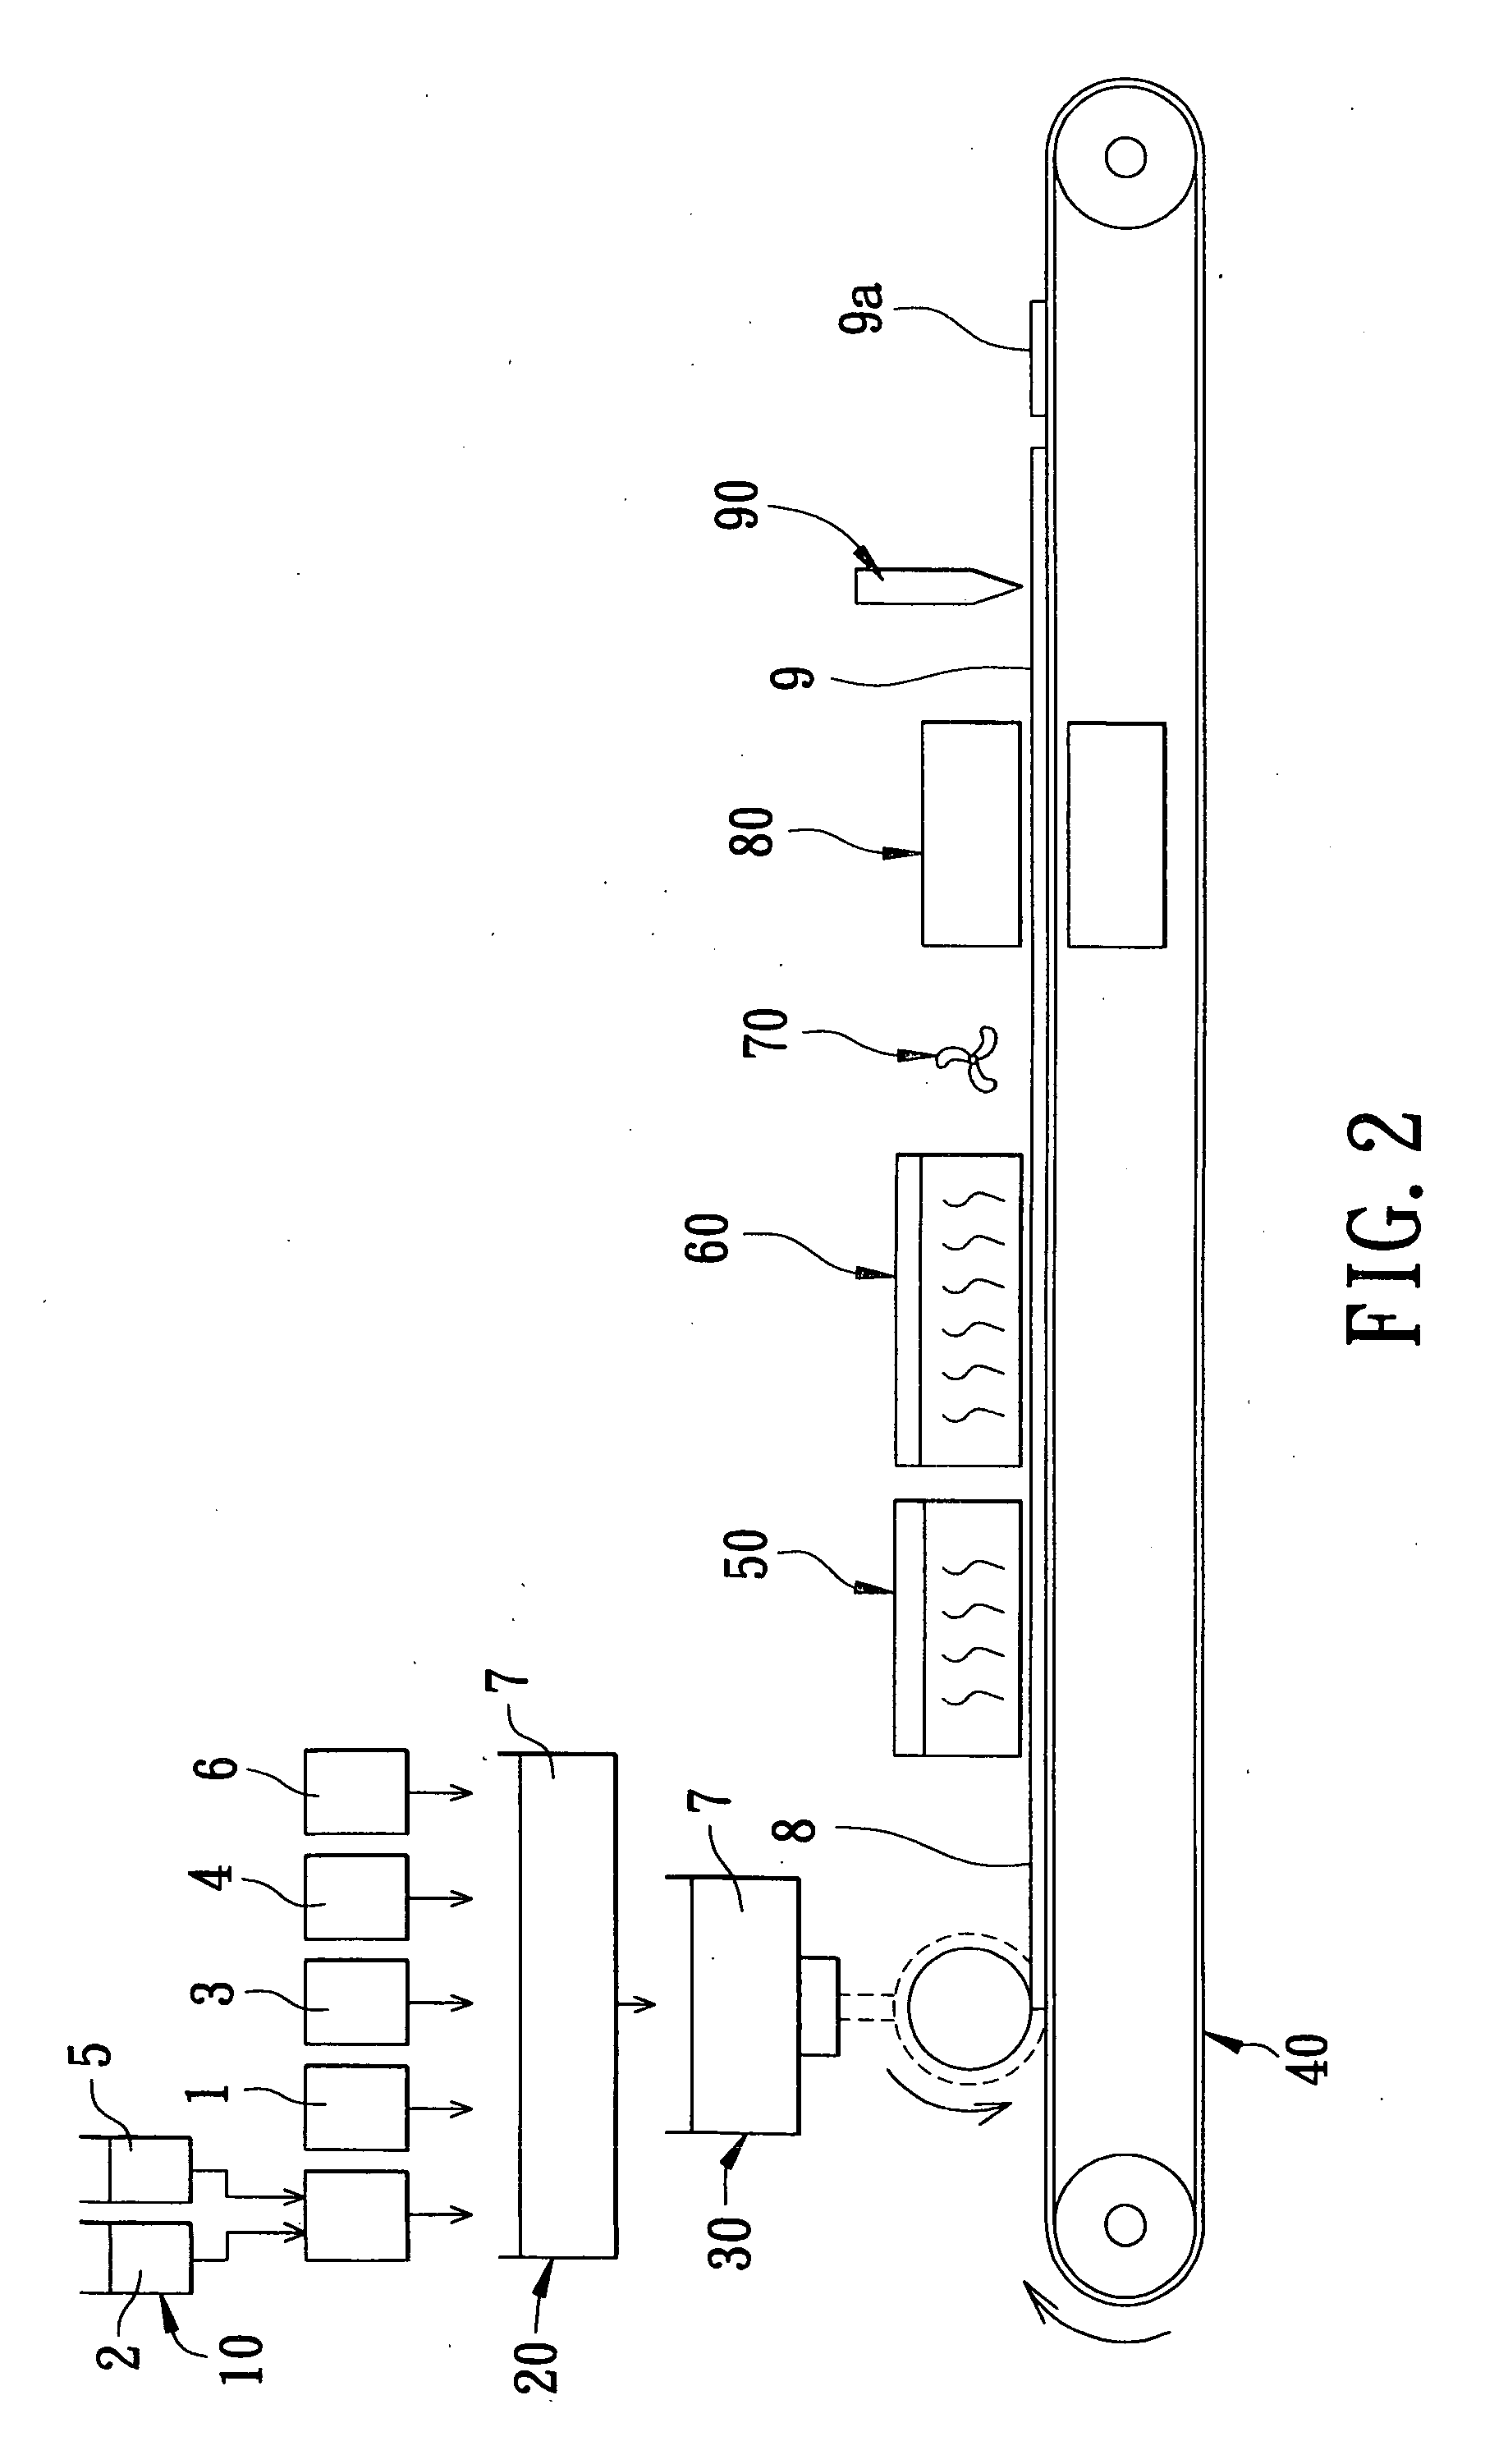 Method for manufacturing foam pads